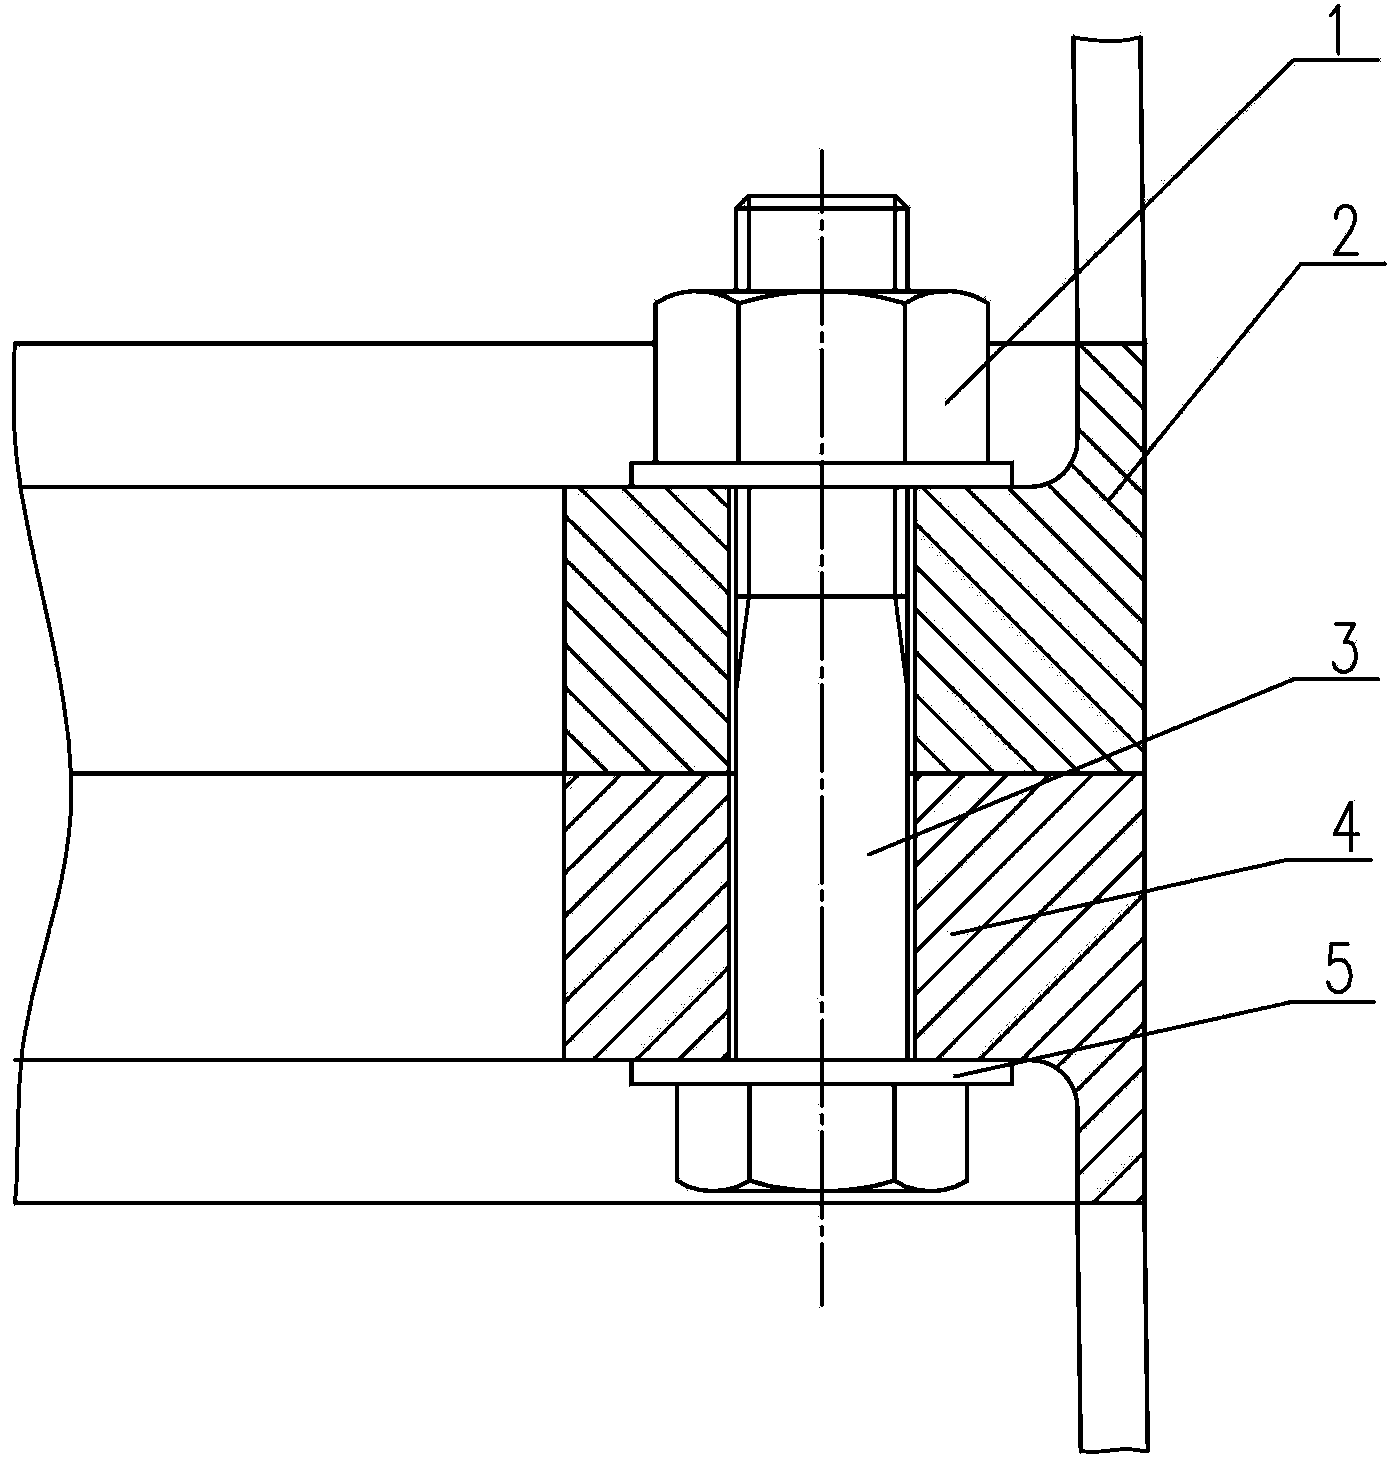 Calculating method of ultimate strength checking of connection of flange and bolt